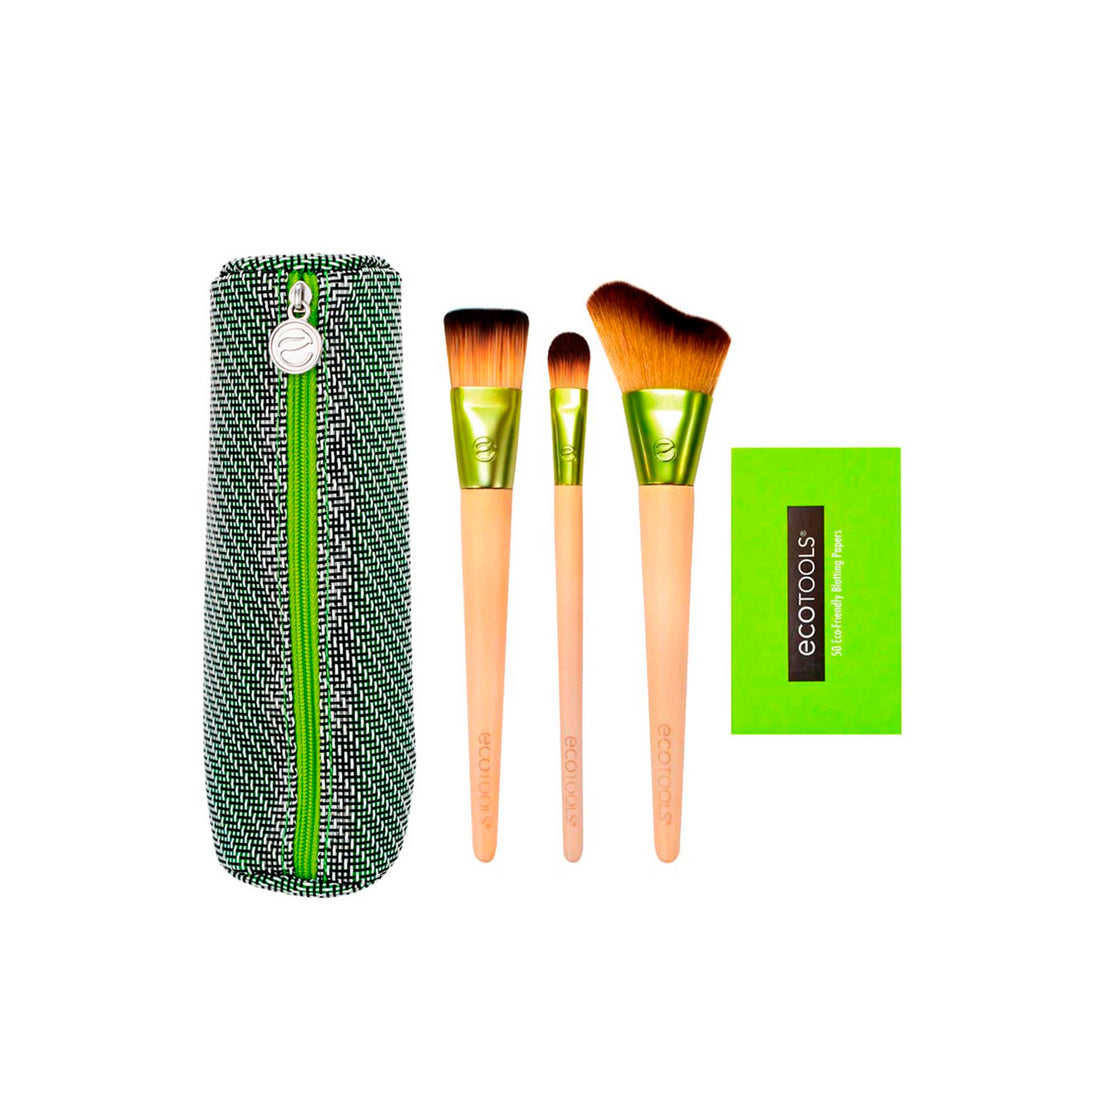 Ecotools Case With 3 Makeup Brushes And Matifying Paper 50 Uni